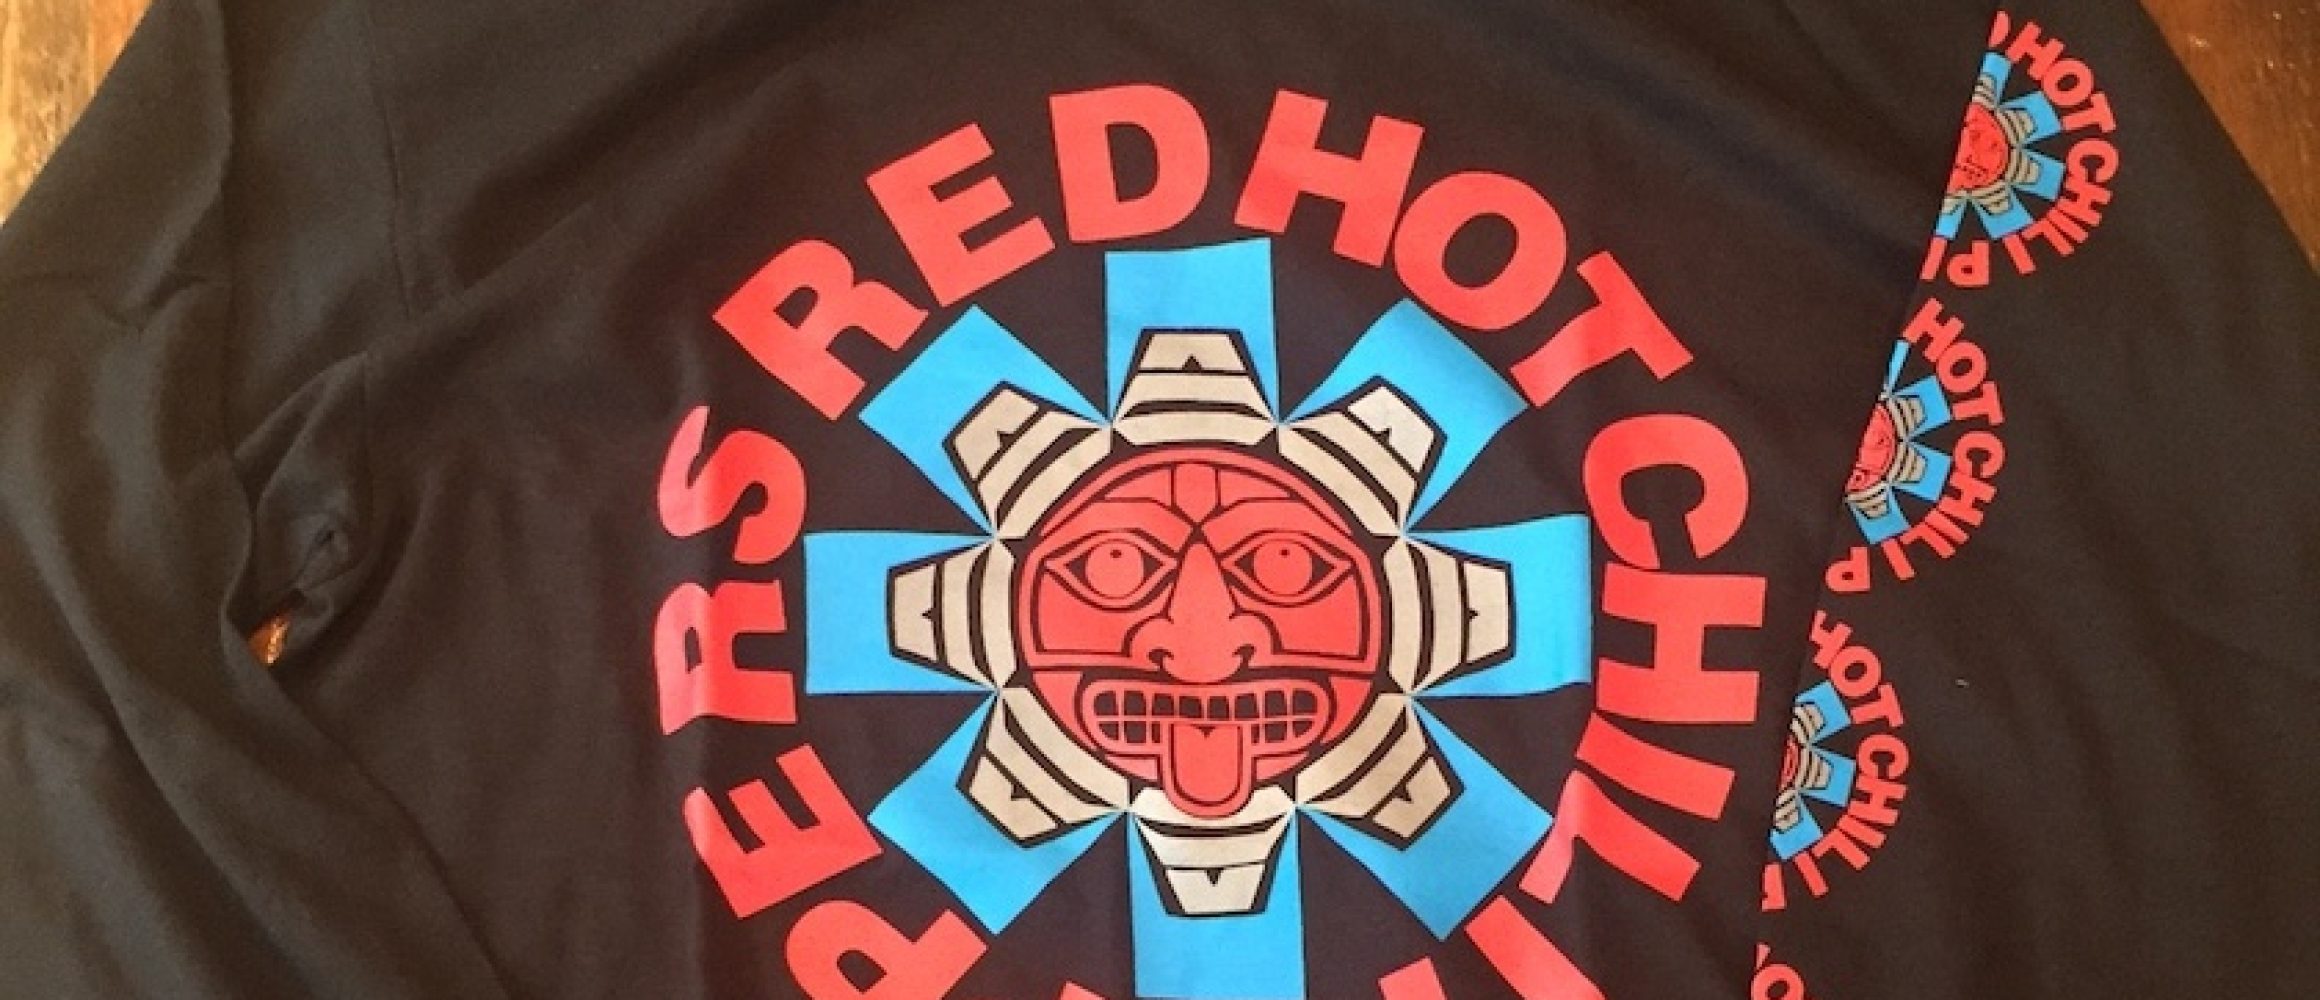 RHCロンハーマン×Red Hot Chili Peppers